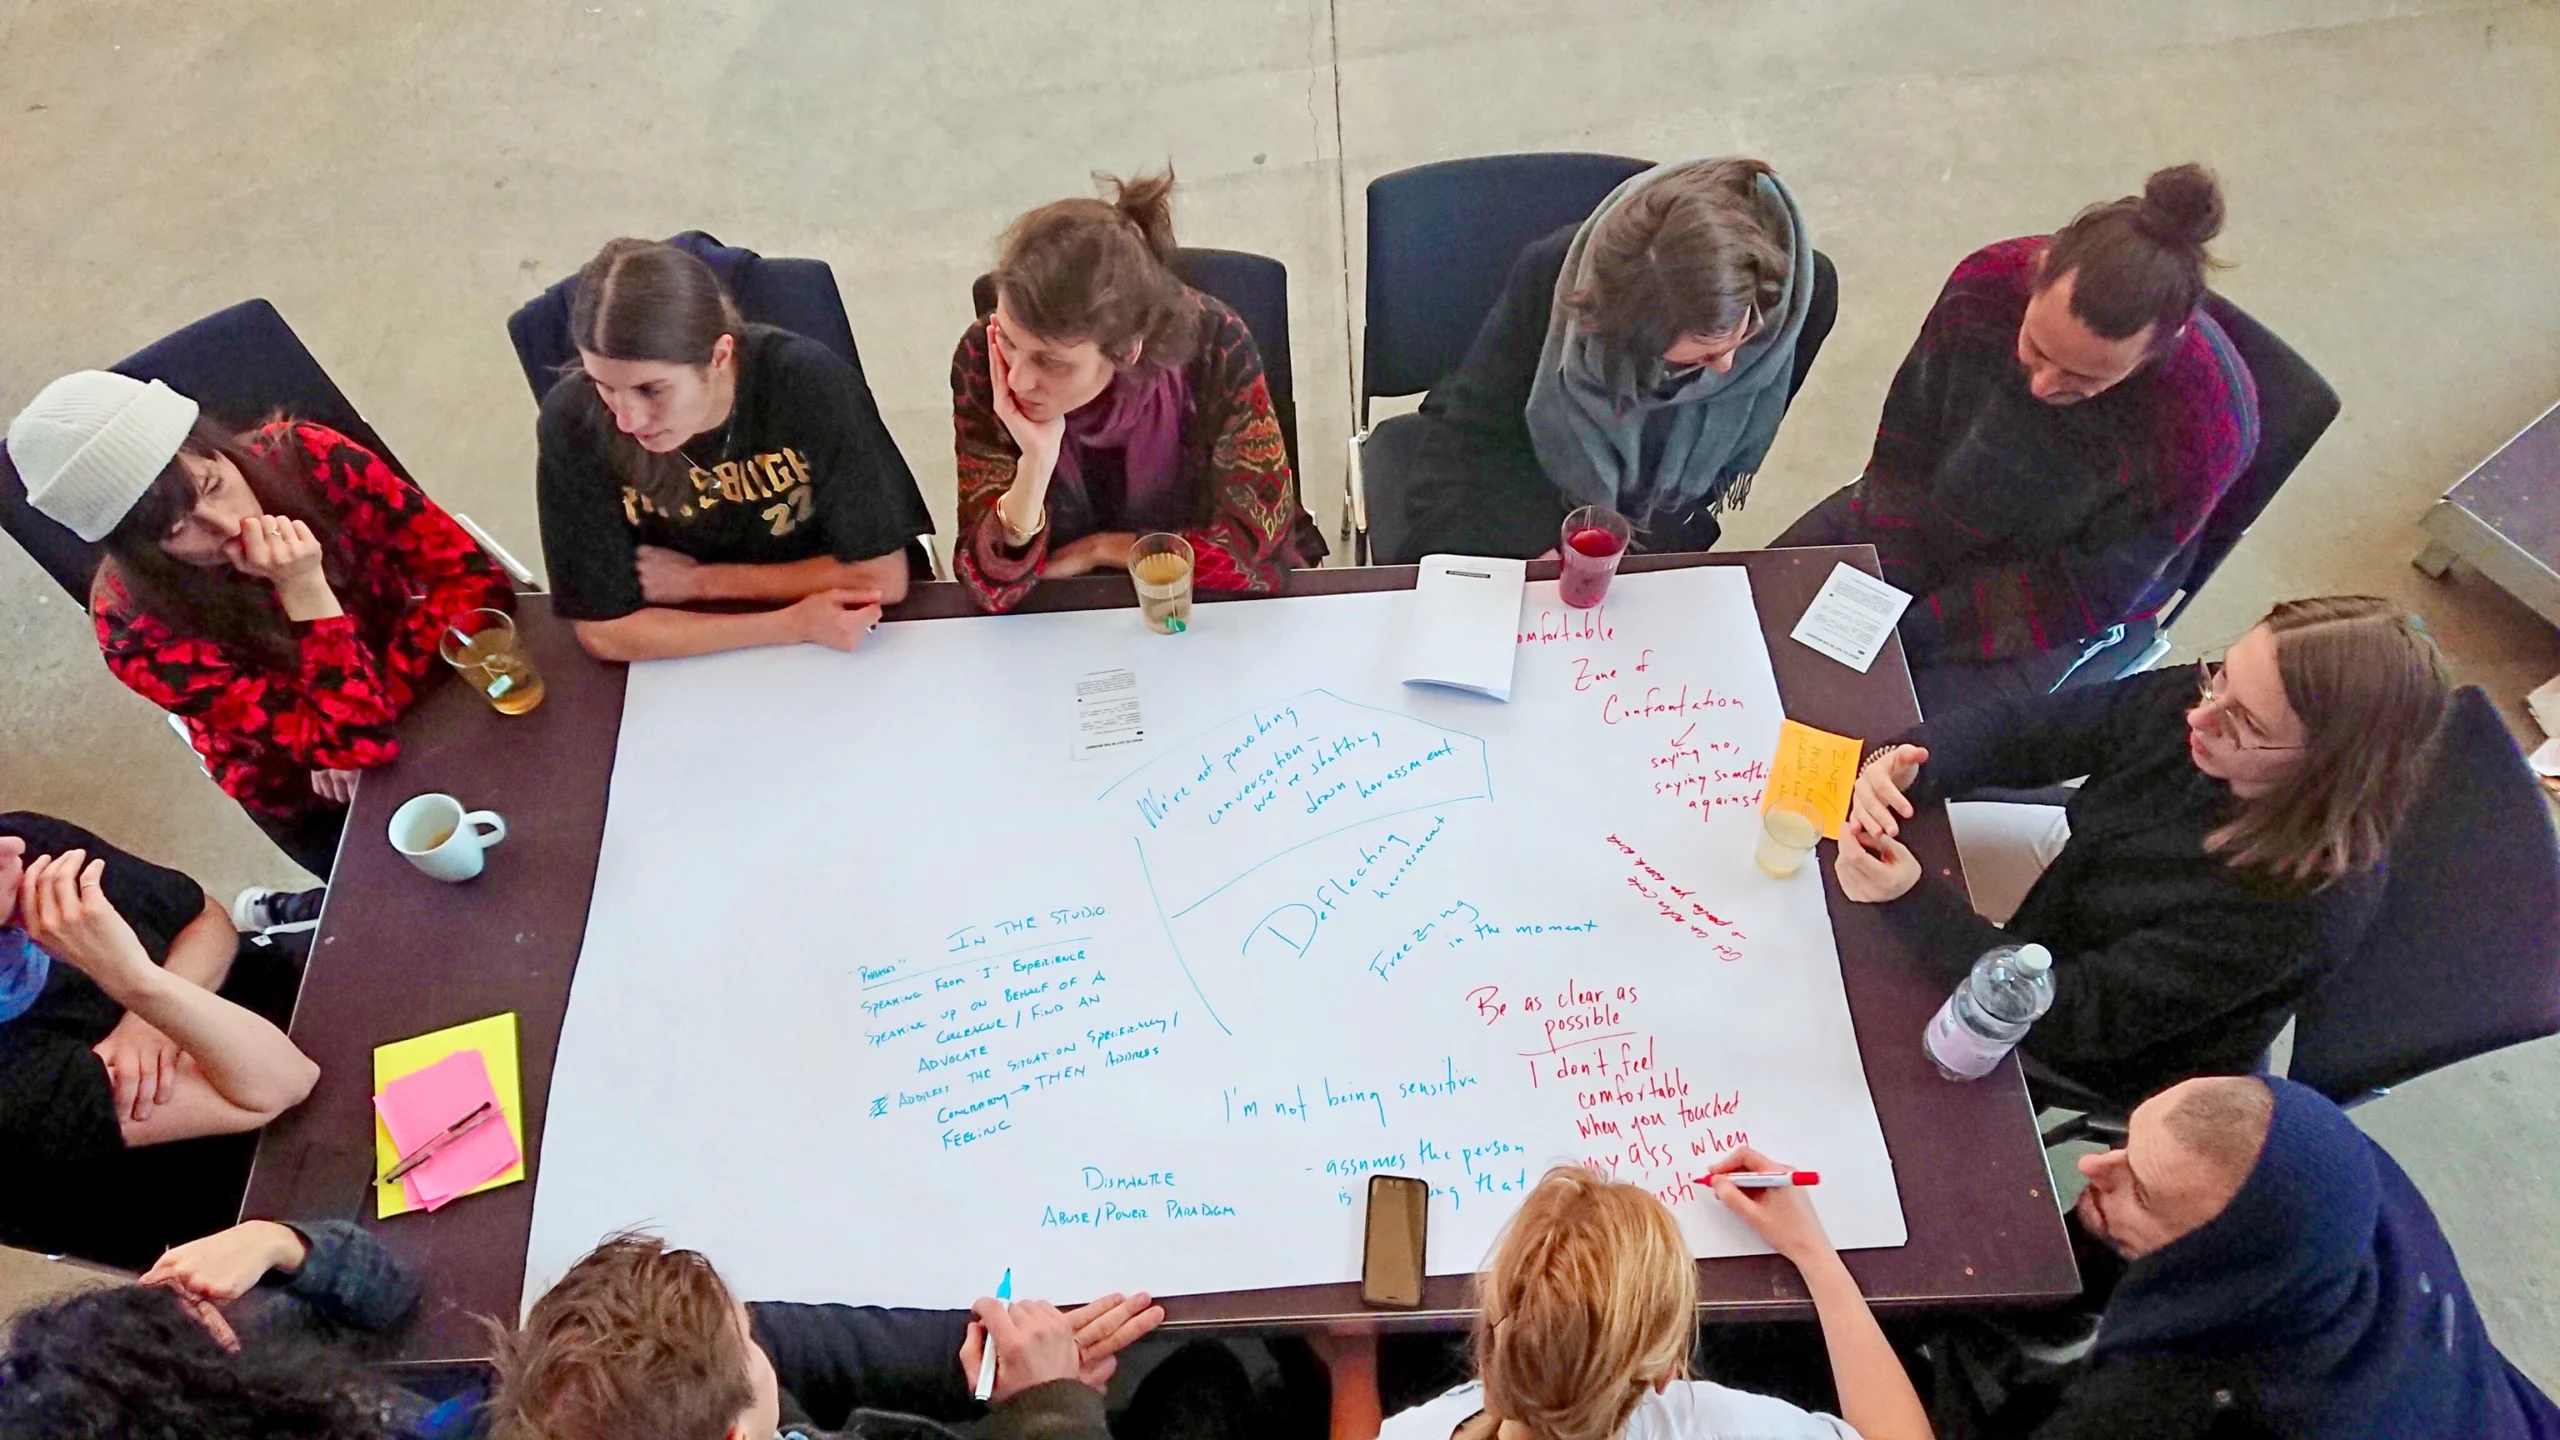 Roughly a dozen people sit crowded around a table that is mostly covered in a large sheet of paper strewn with red and blue writing. Someone adds to it in red marker while they listen to each other speak.